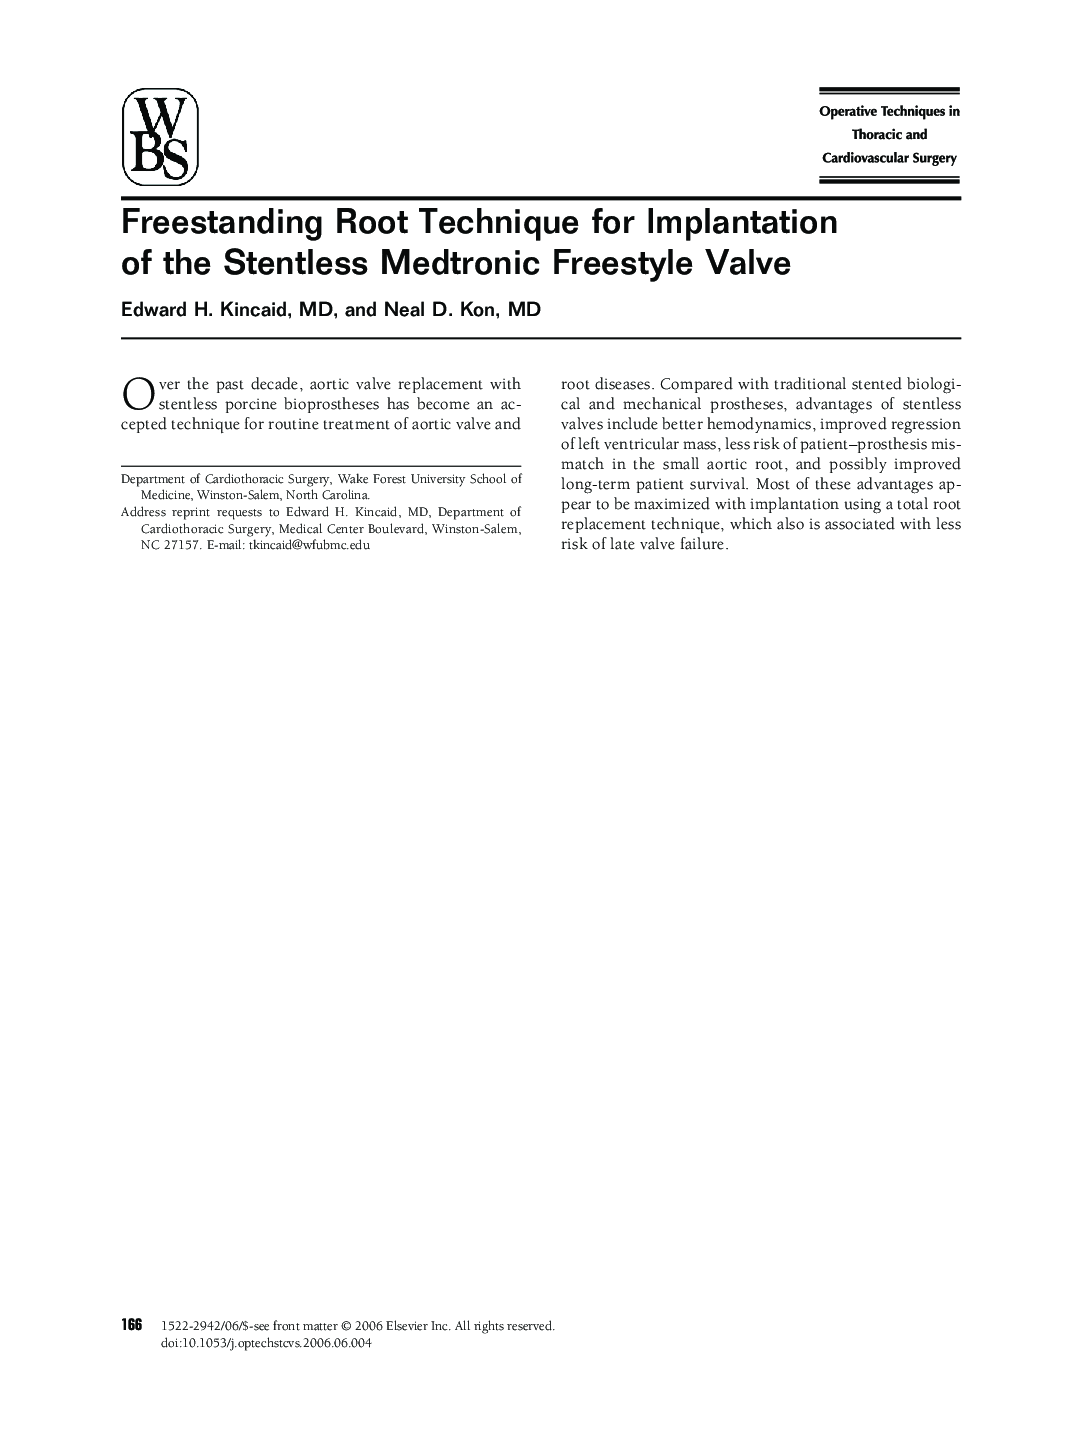 Freestanding Root Technique for Implantation of the Stentless Medtronic Freestyle Valve